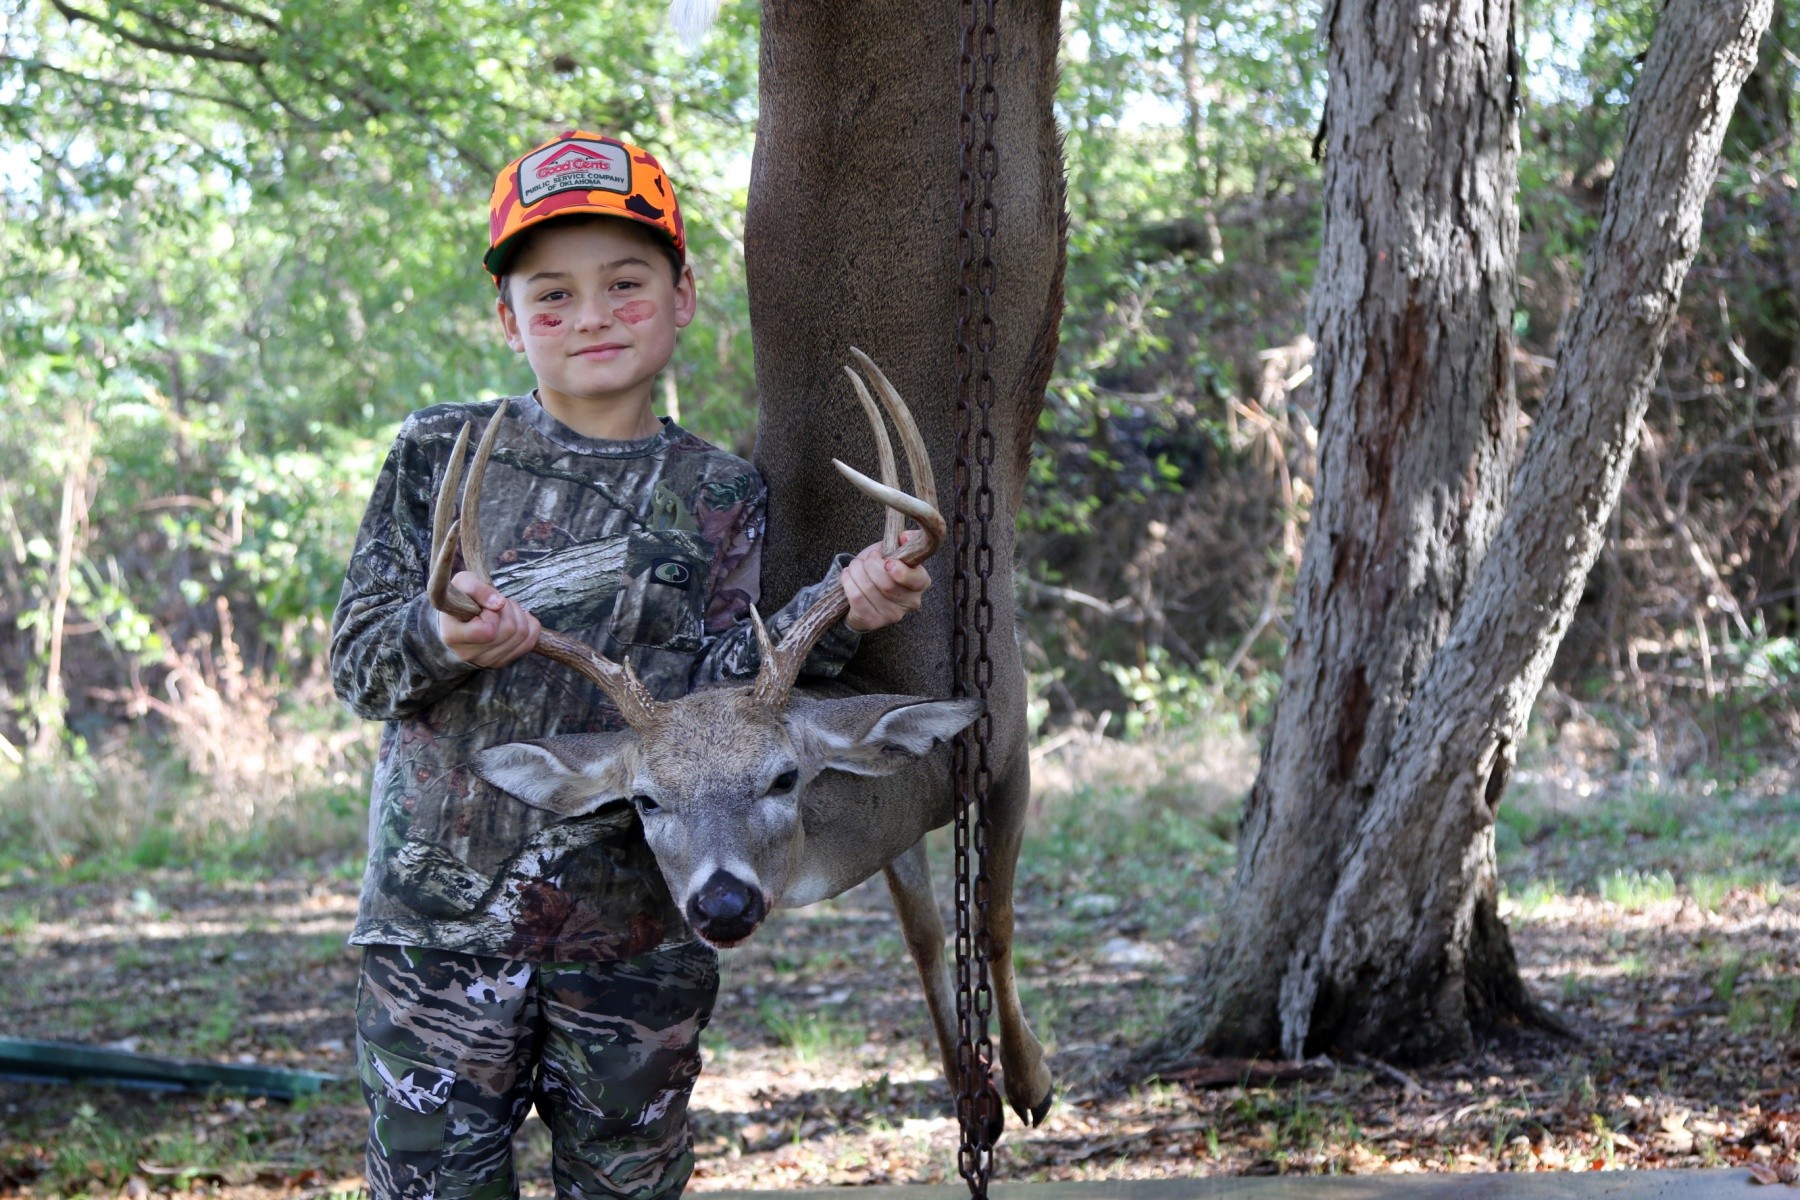 Second Annual Hugo Lake youth hunt success Article The United States Army